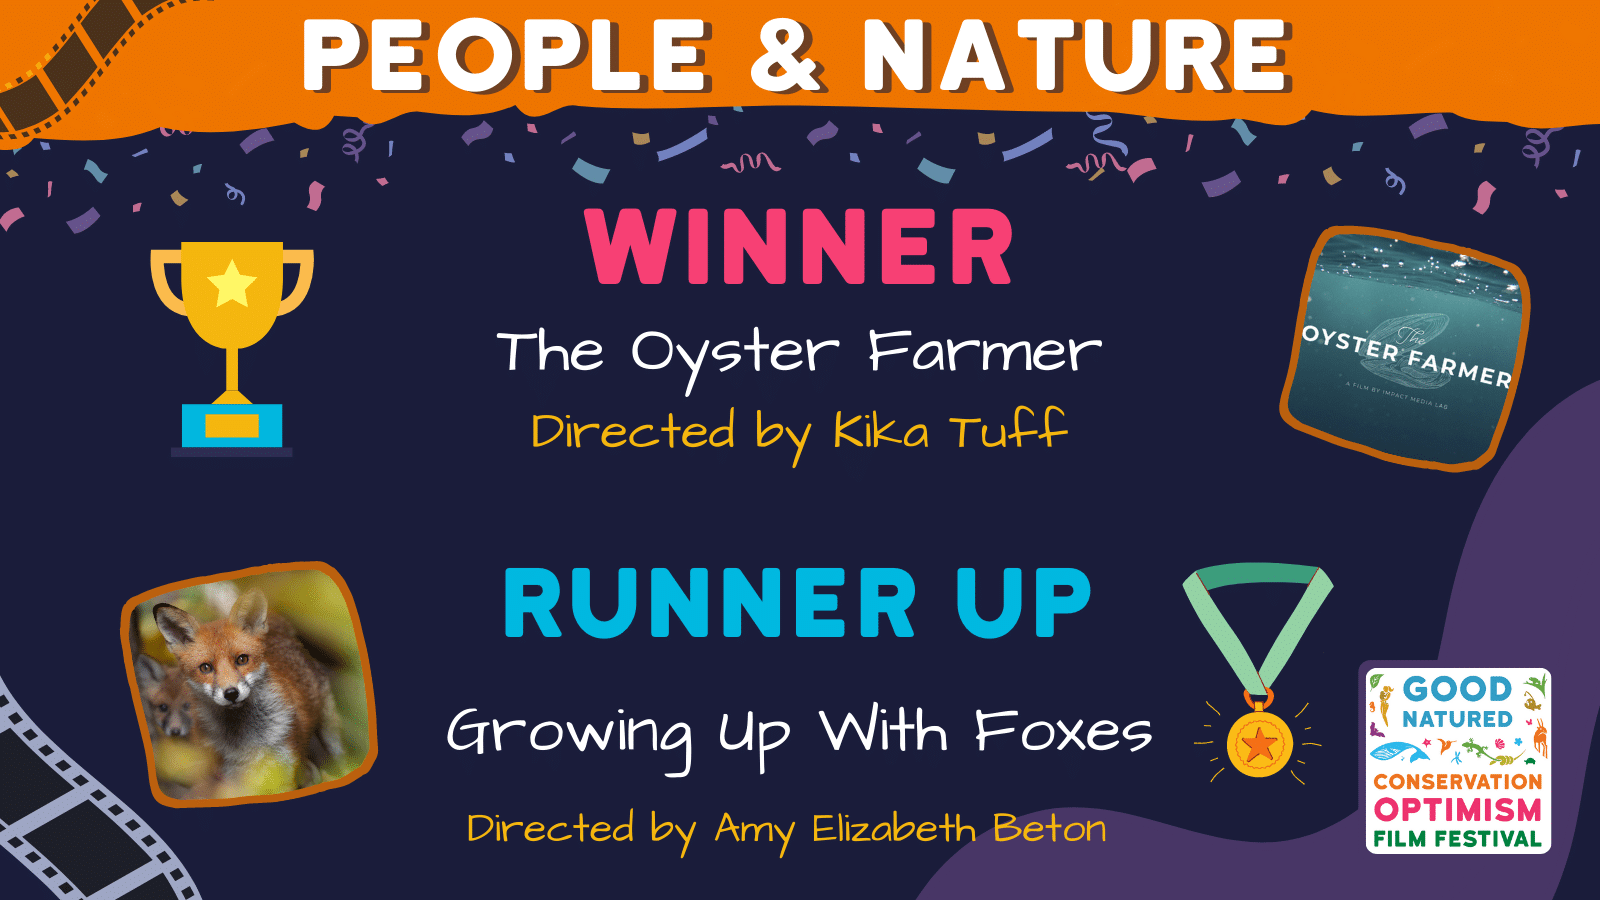 Our winner is: The Oyster Farmer - Directed by Kika Tuff